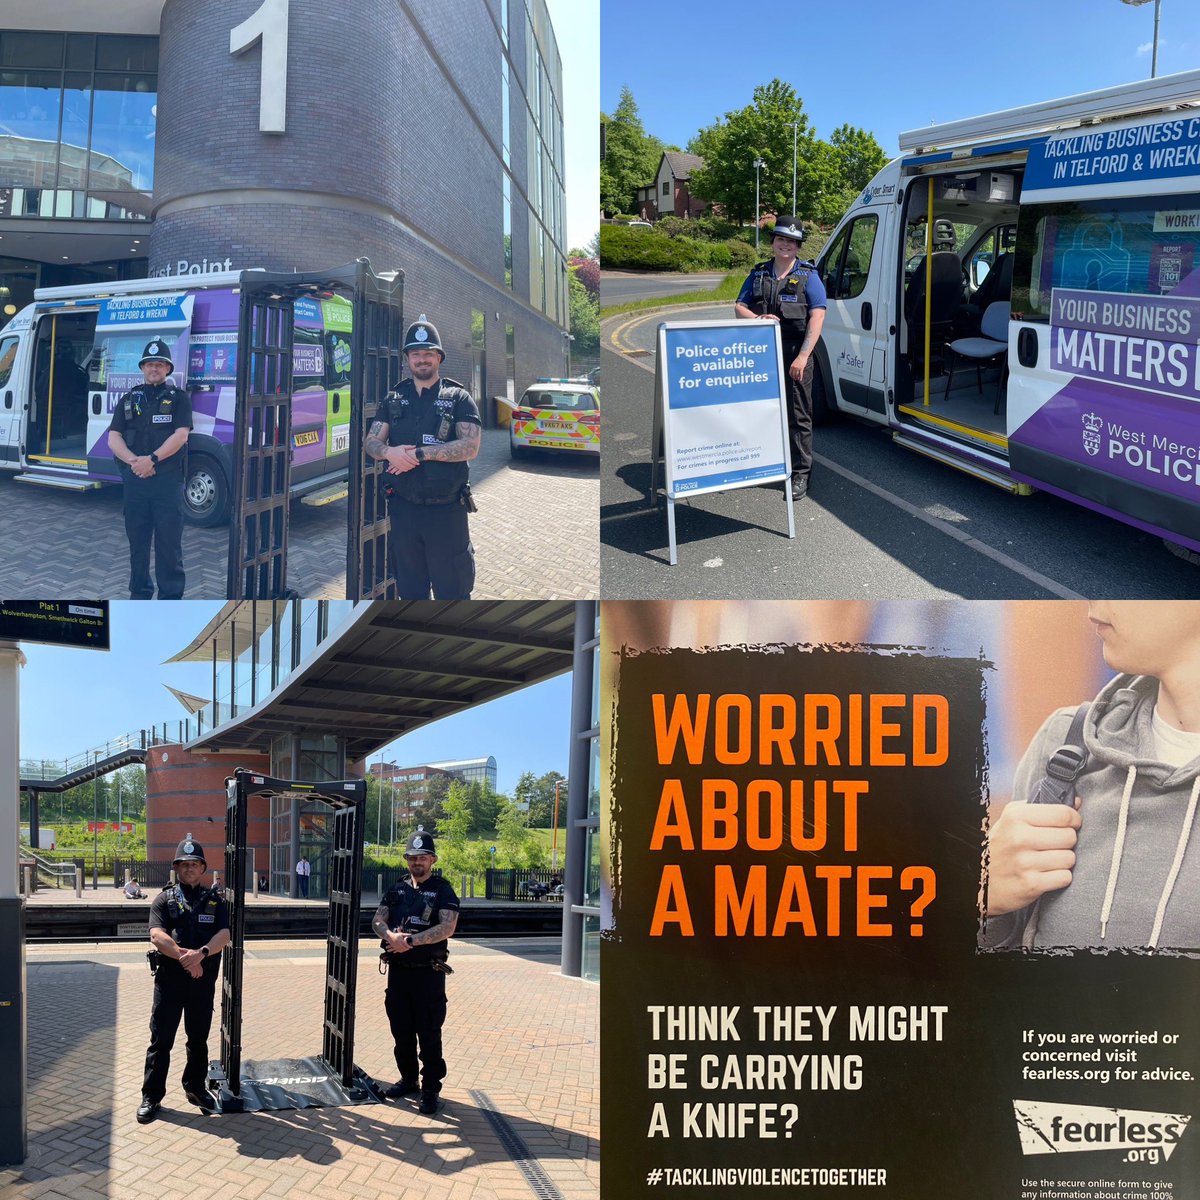 South Telford SNT have been at Telford Railway station and Southwater in support of Opsceptre. Using the opportunity to engage and highlight the dangers of carrying knives. #OpSceptre #keepingcommunitiessafe